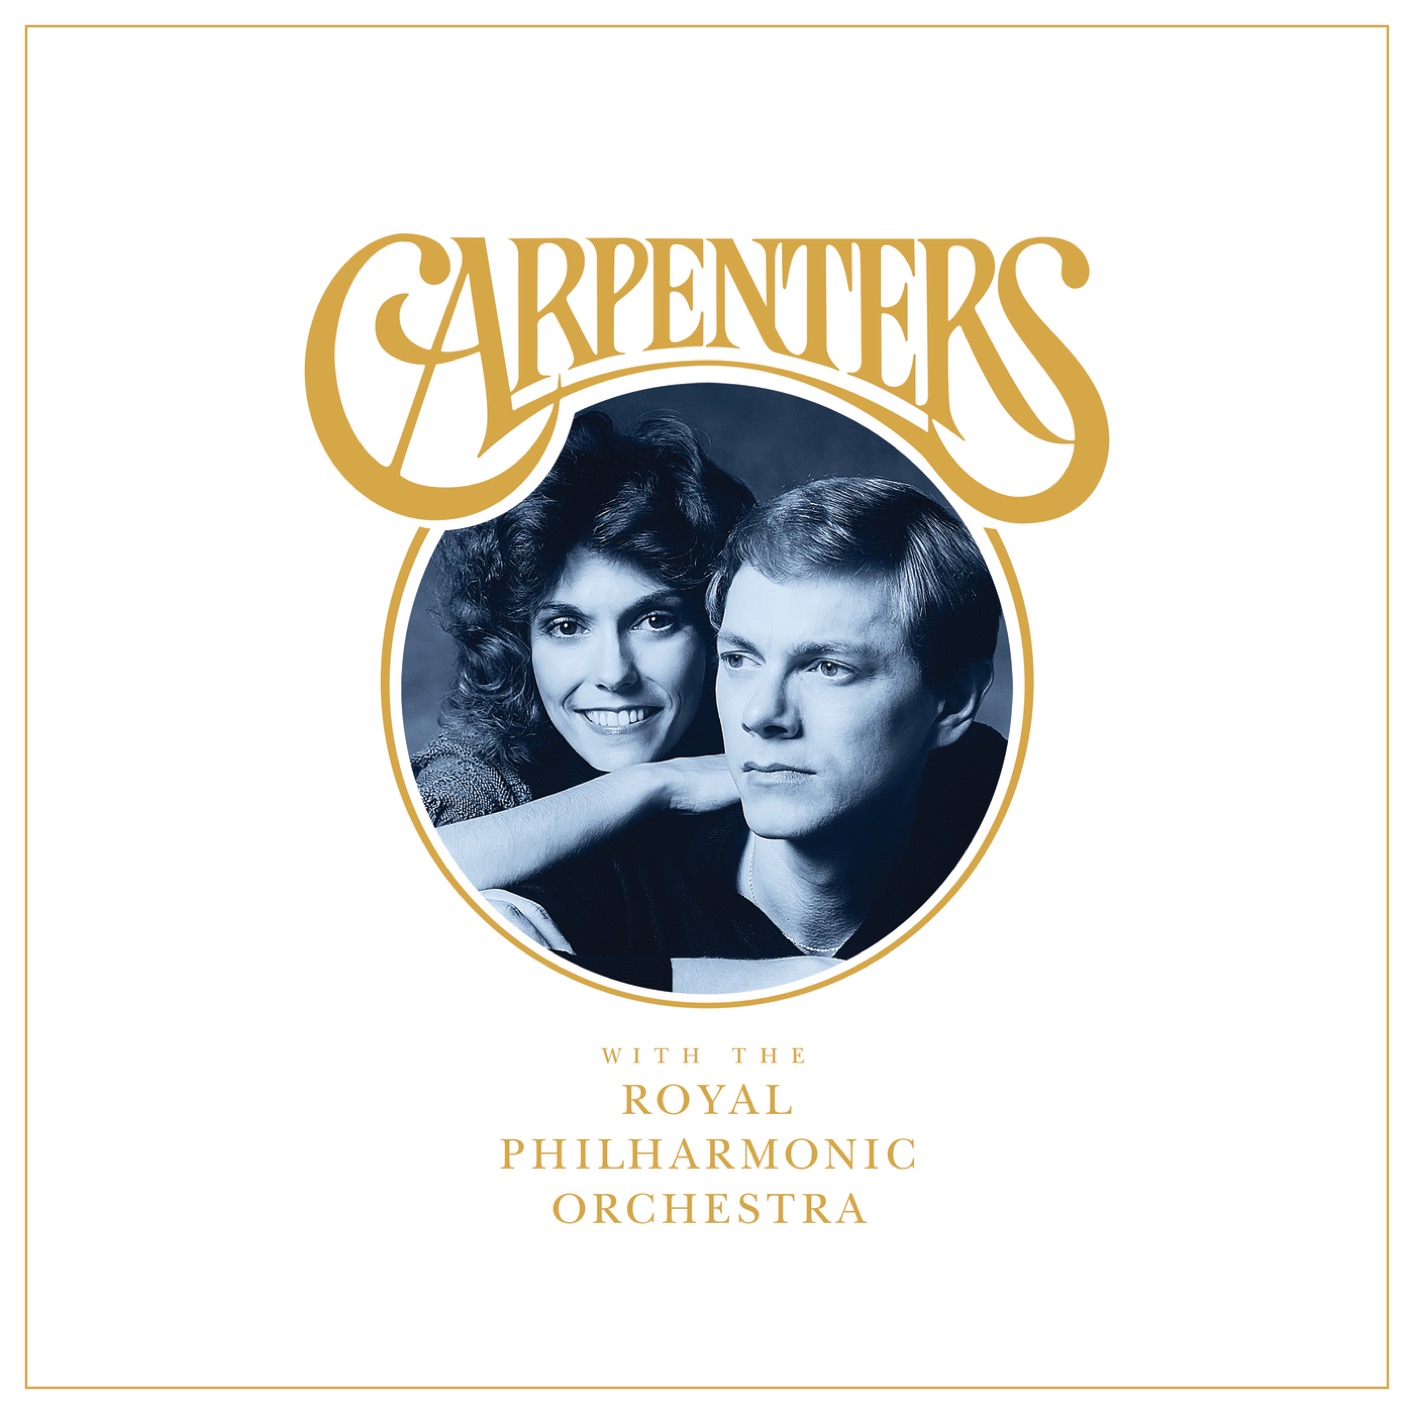 Carpenters – Carpenters With The Royal Philharmonic Orchestra (2018) [FLAC 24bit/192kHz]